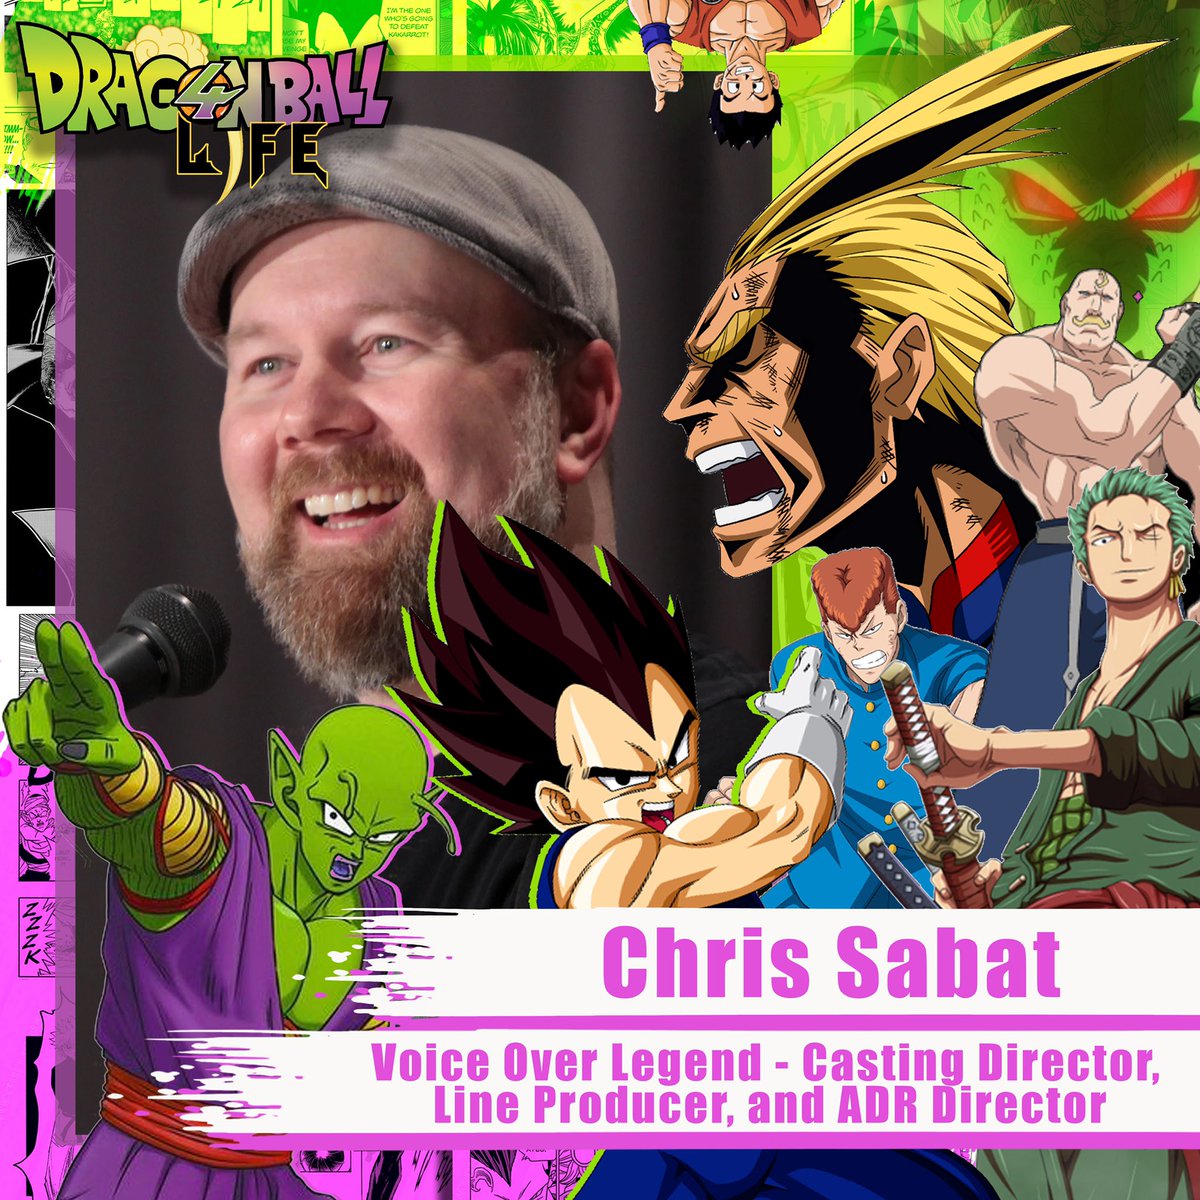 We drop our interview with The Prince of All Saiyans himself : @JustChrisSabat 

Listen here: linktr.ee/DB4L?fbclid=PA…

#DragonBall #Vegeta #anime #podcast